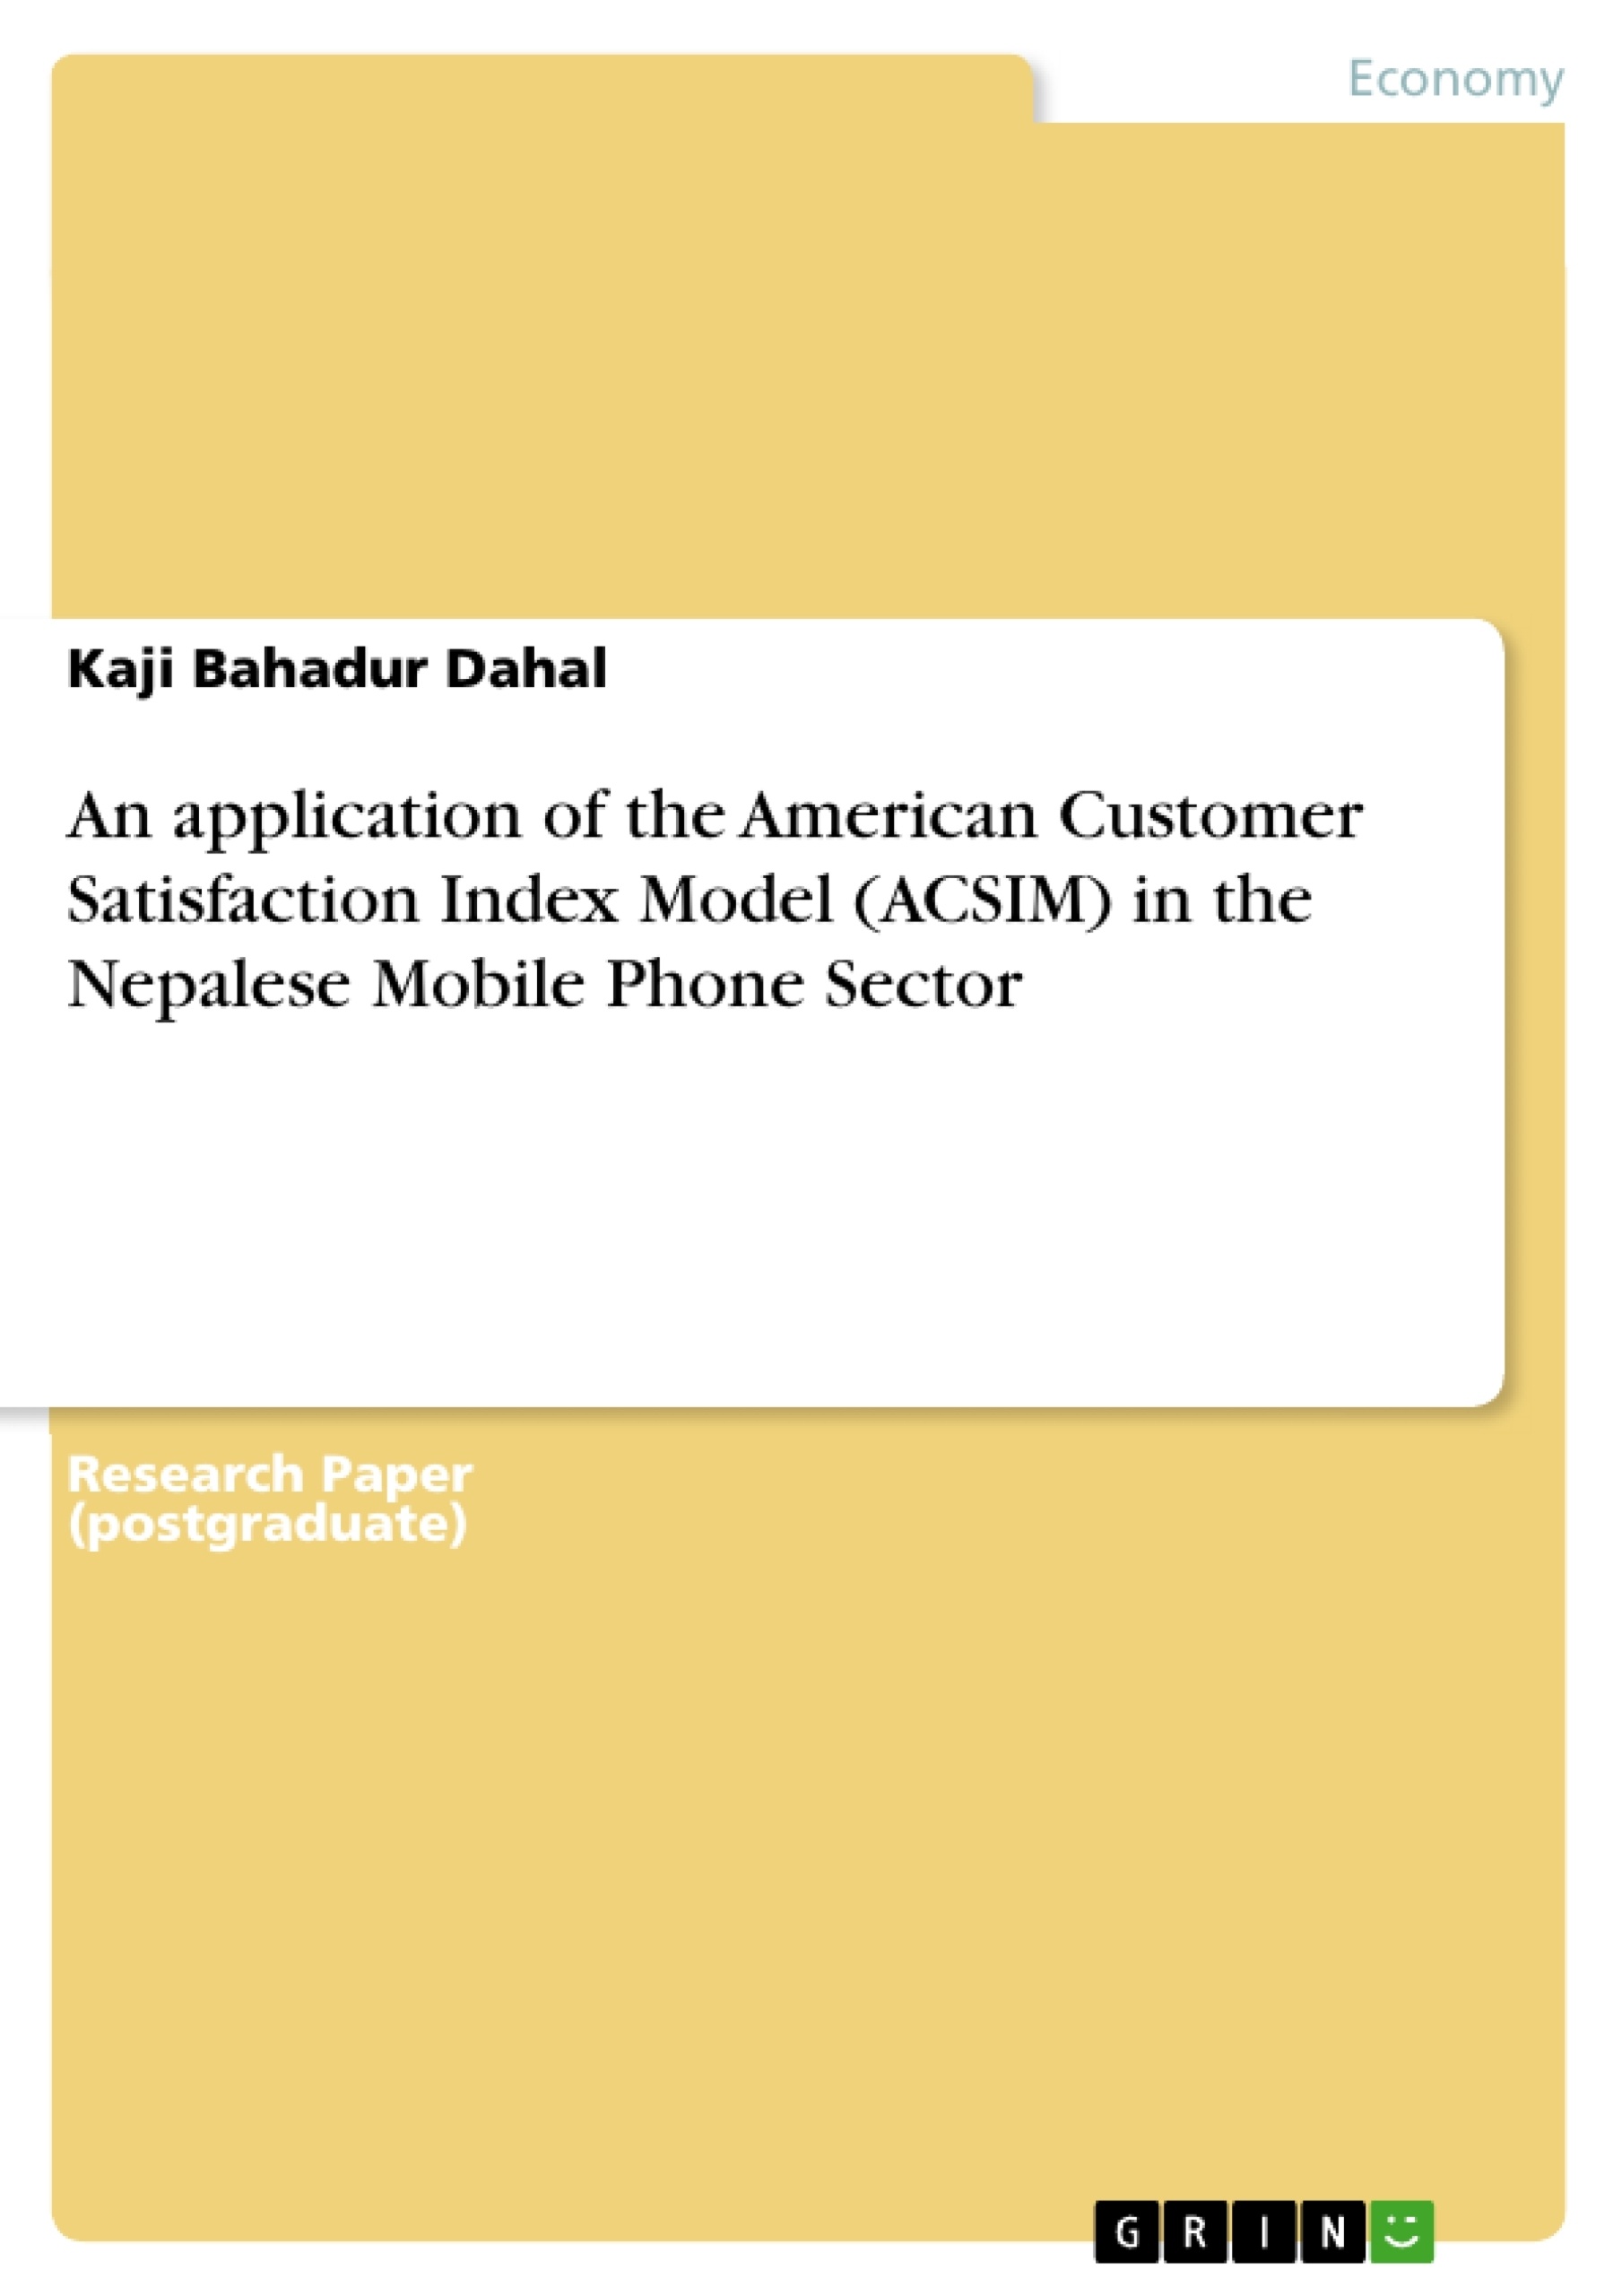 Title: An application of the American Customer Satisfaction Index Model (ACSIM) in the Nepalese Mobile Phone Sector